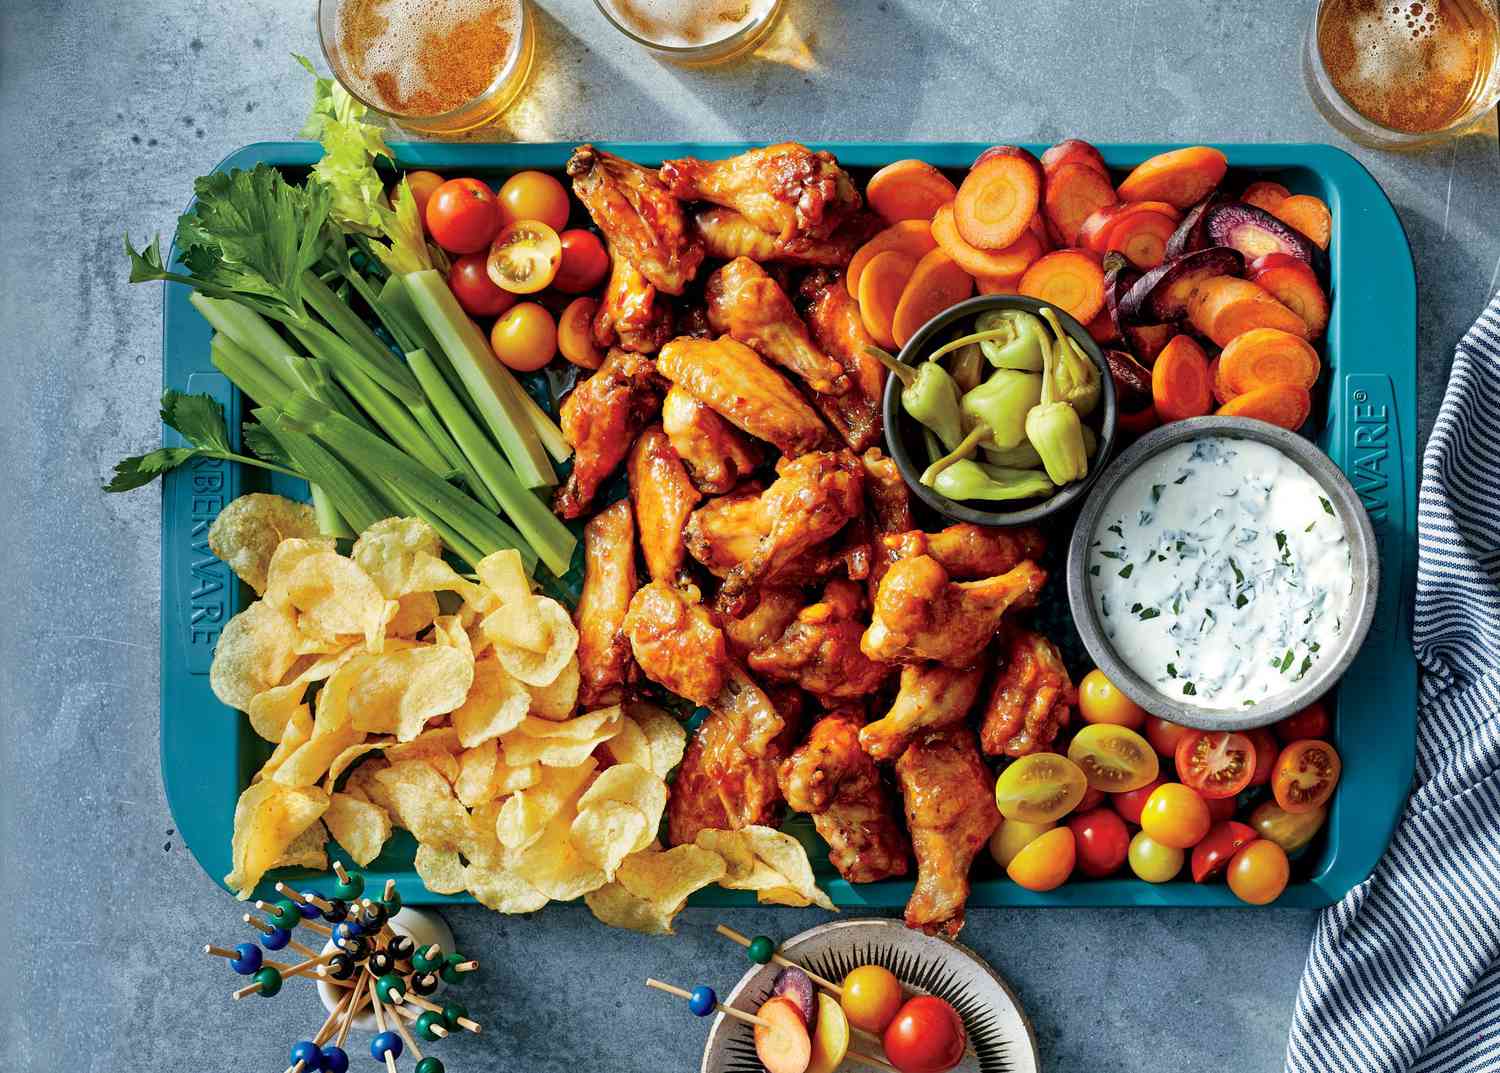 10 Delicious Sides To Pair With Chicken Wings